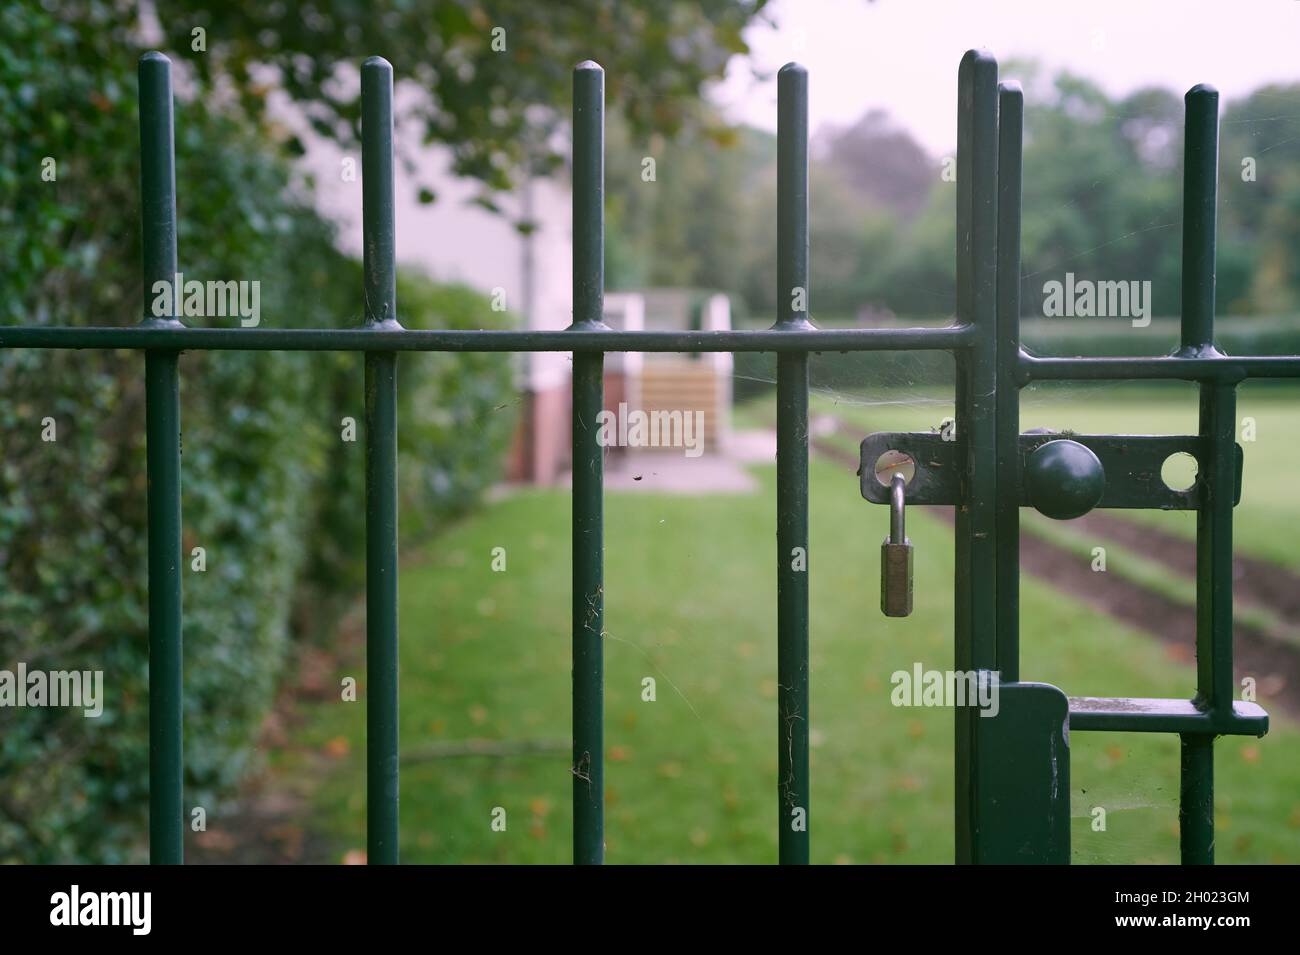 Padlocked closed green metal gate with out of focus park and lawn in background Stock Photo